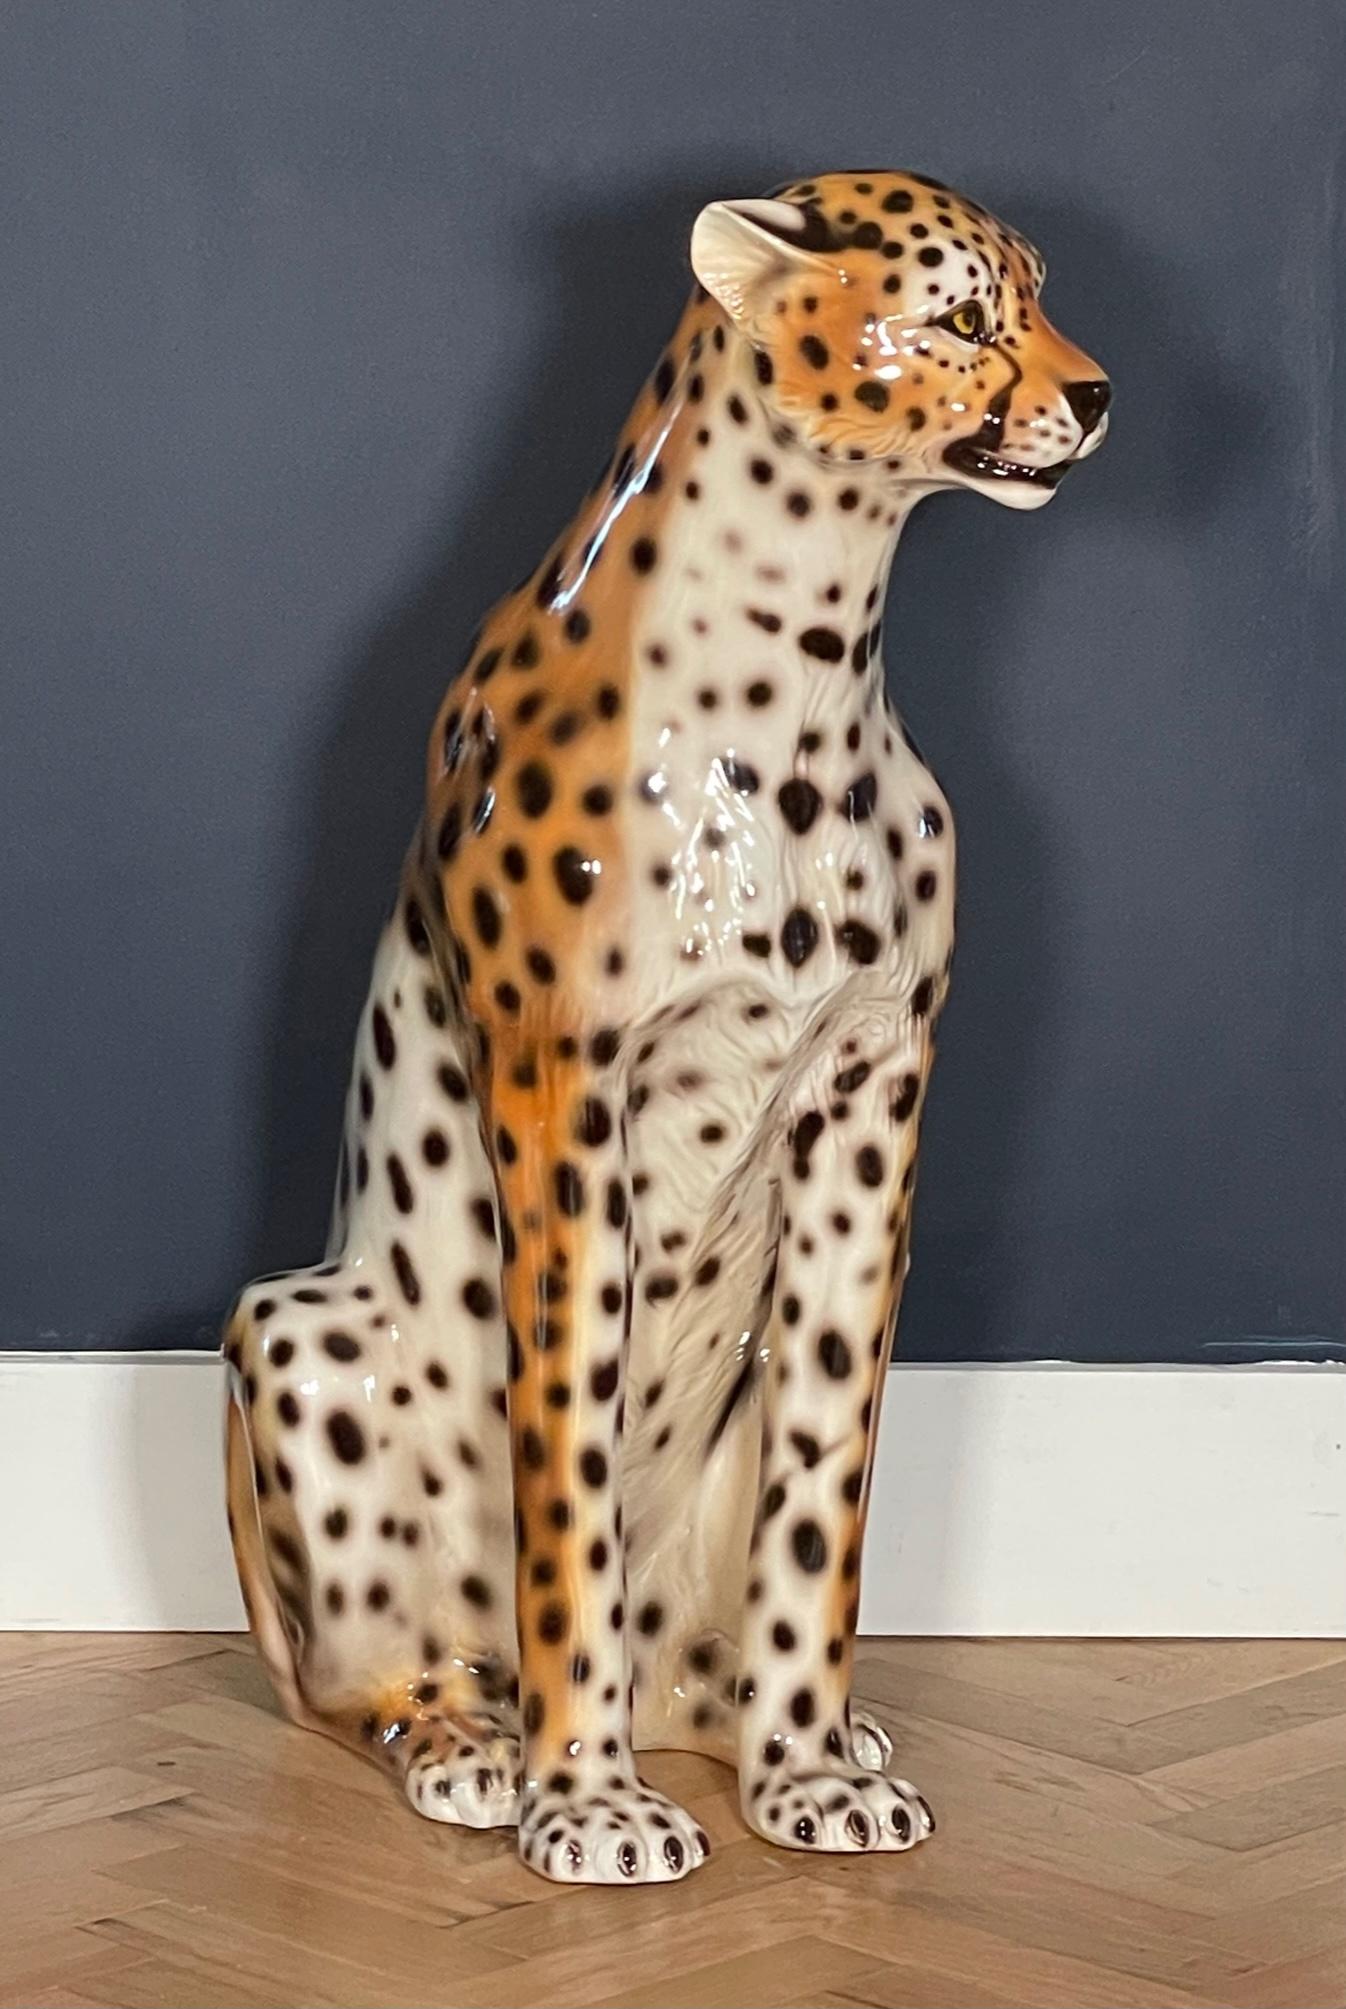 Ceramic cheetah or leopard statue made in Italy stands 30